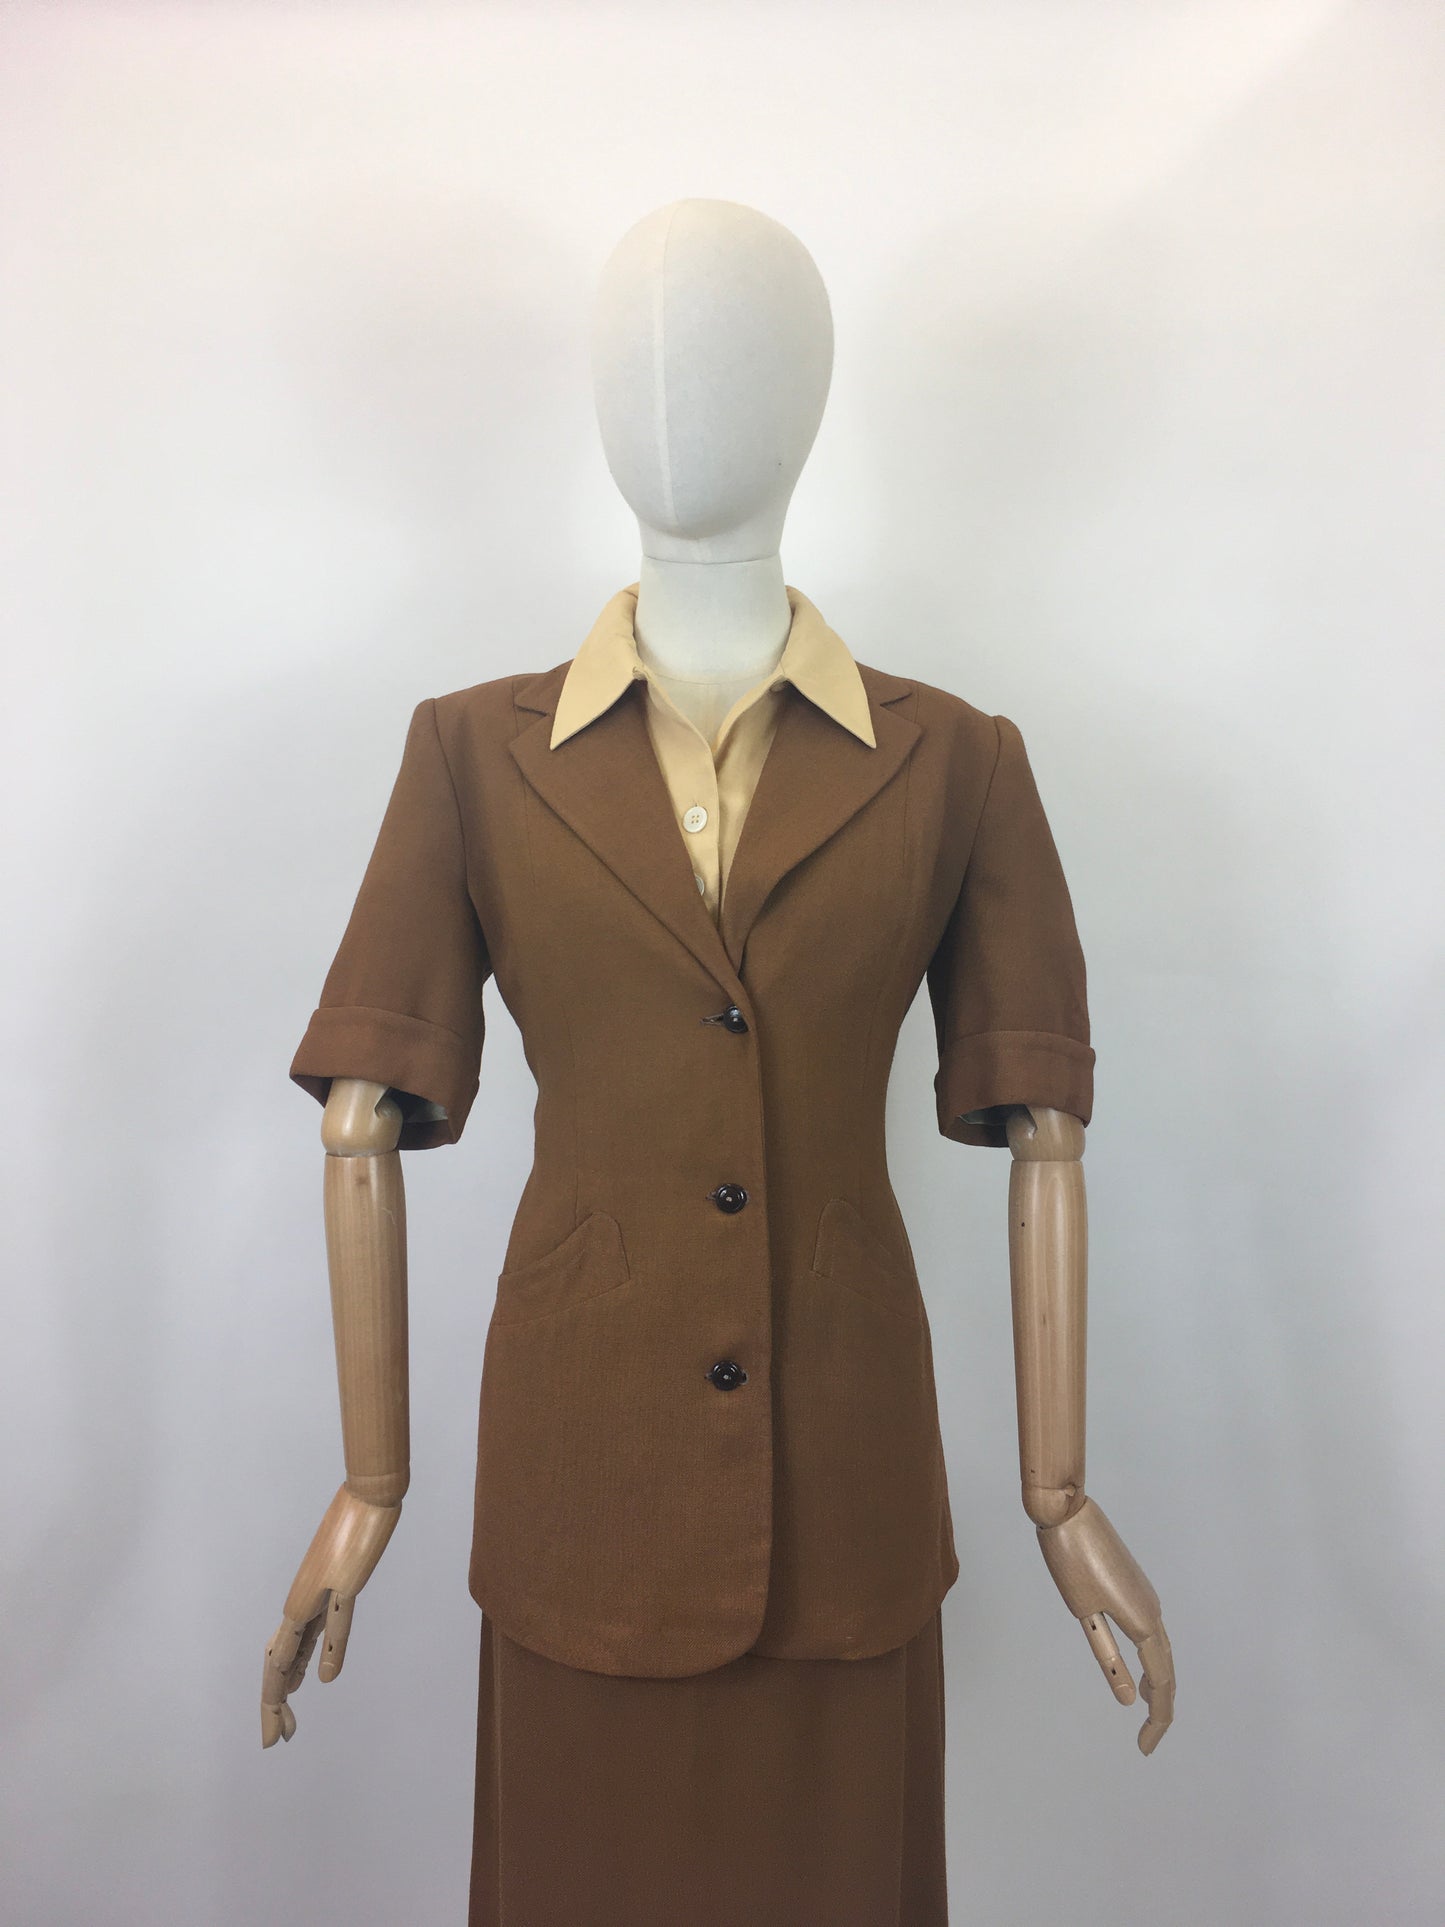 Original 1940’s Stunning 2pc Suit in Moygoshal Linen - In A Warming Brown